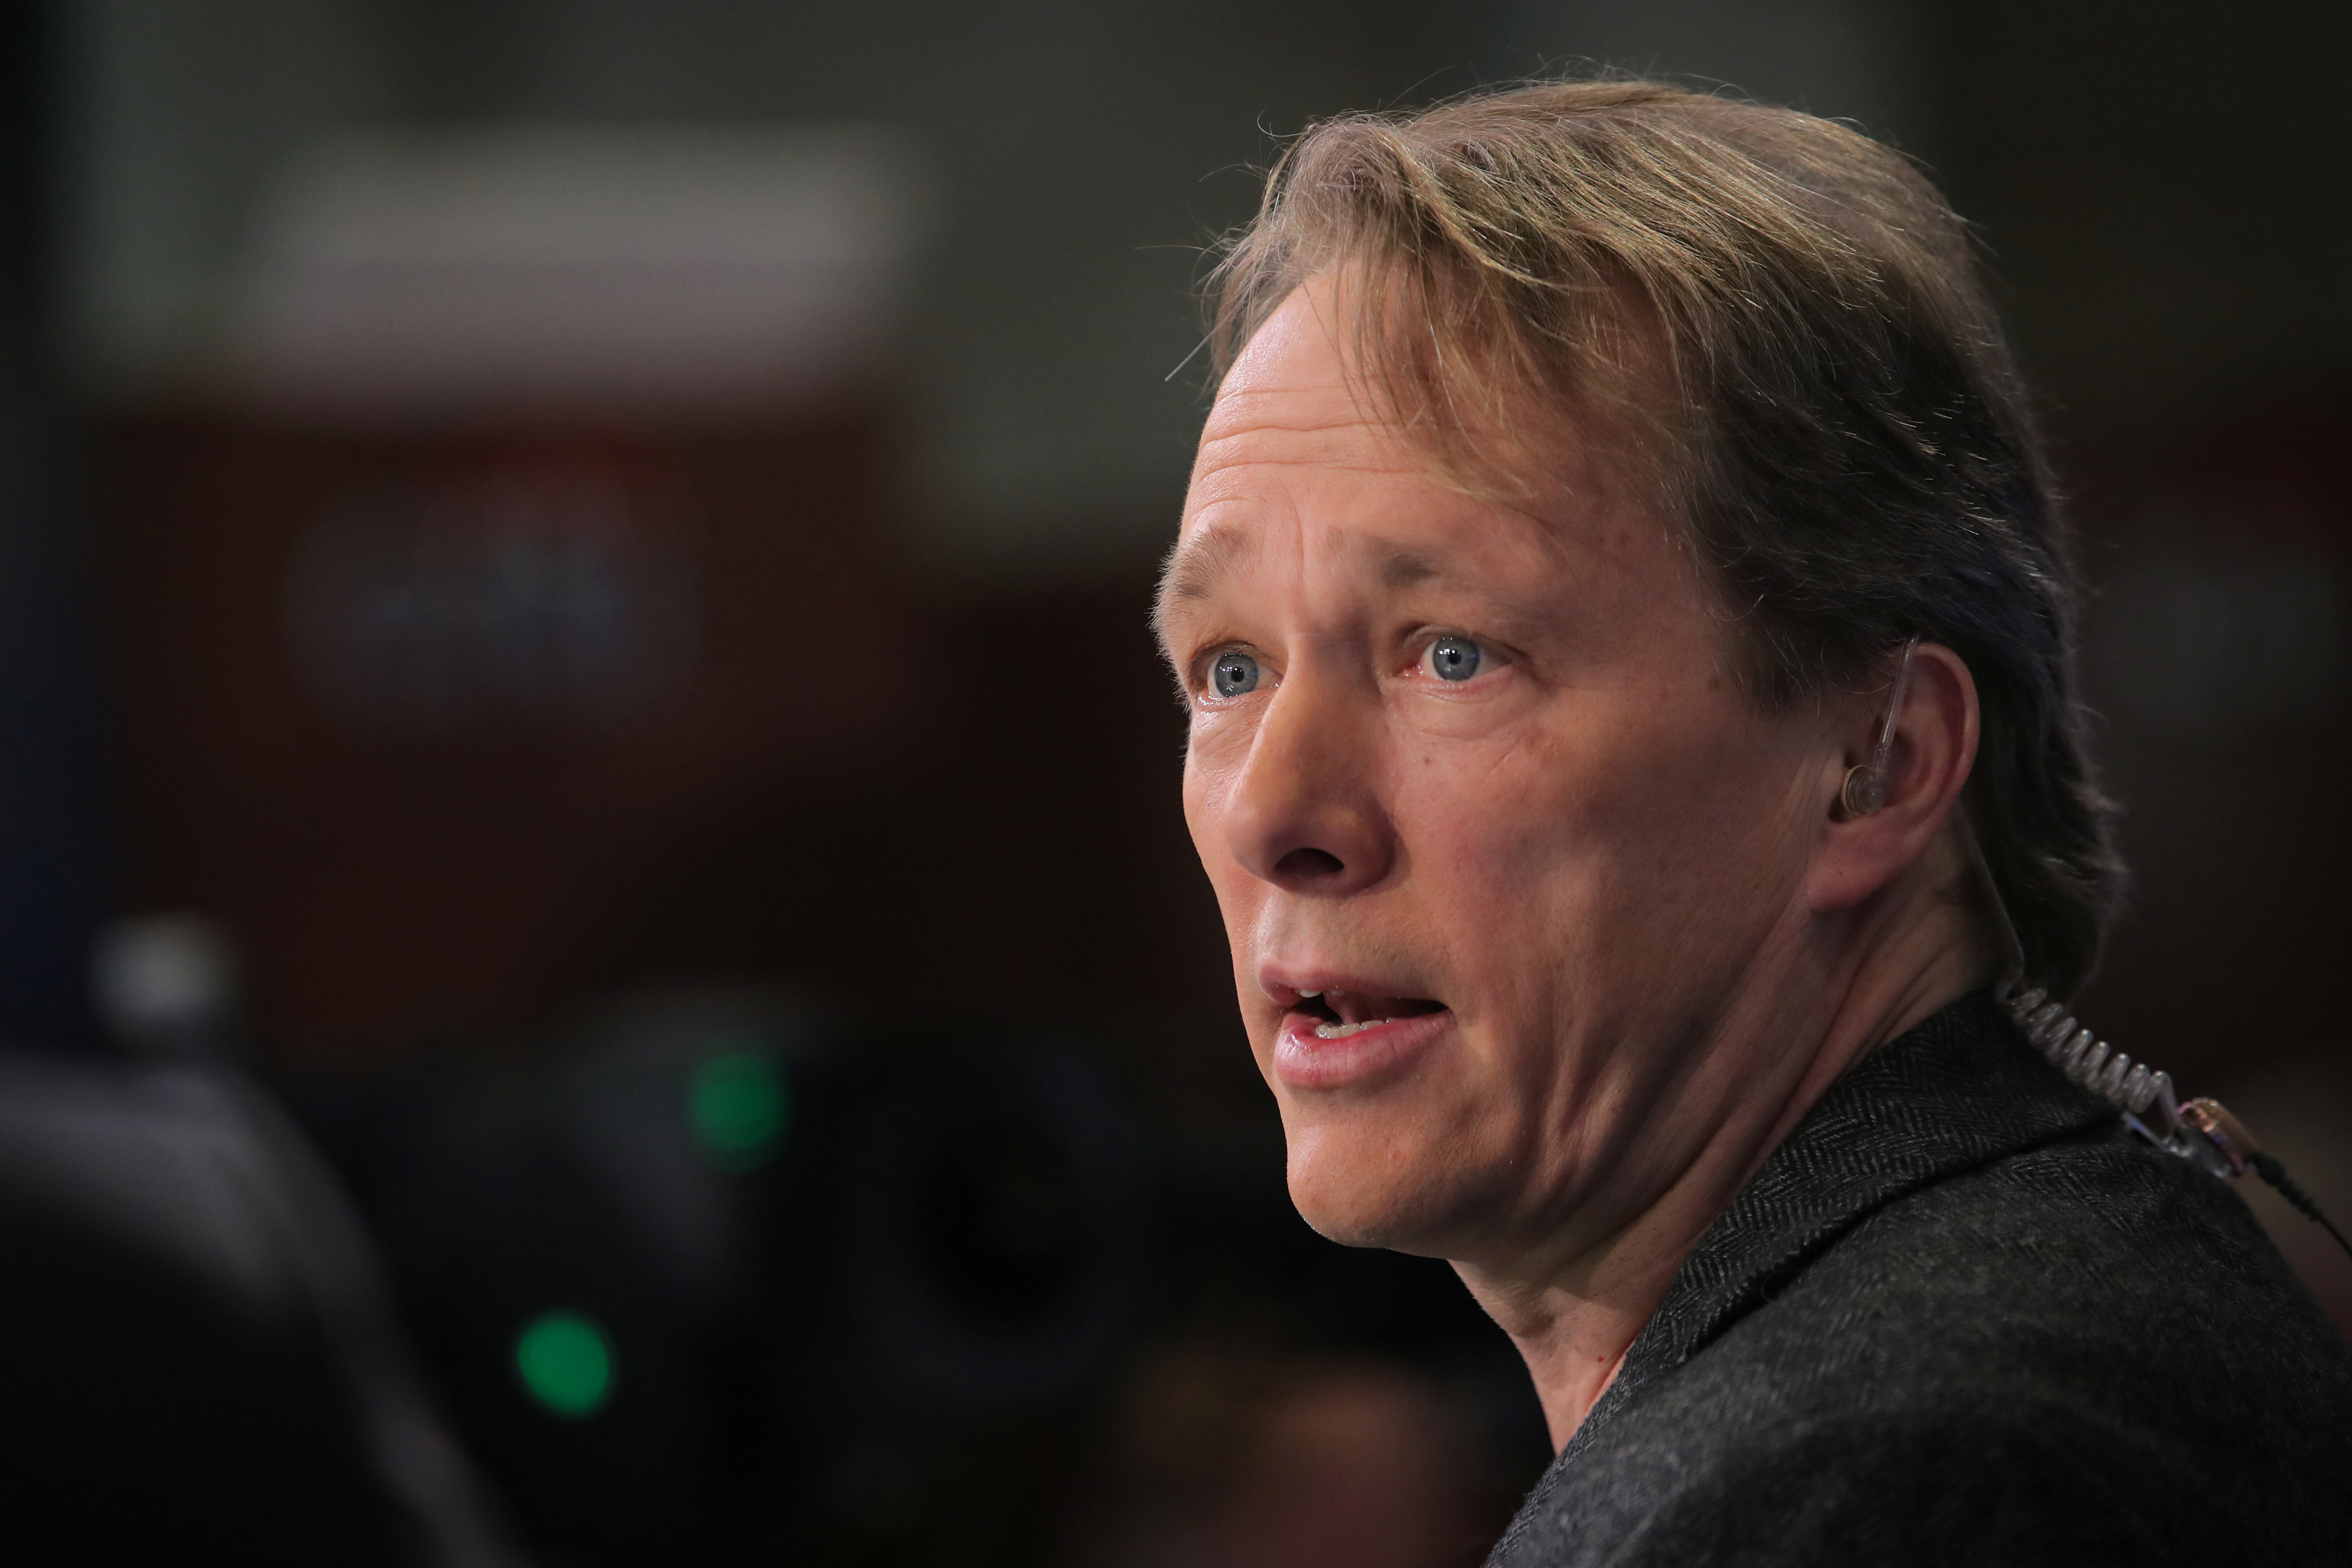 Bruce Linton, Founder and Co-CEO of Canopy Growth, speaks to CNBC on the floor of the New York Stock Exchange (NYSE) in New York, U.S., March 7, 2019. REUTERS/Brendan McDermid